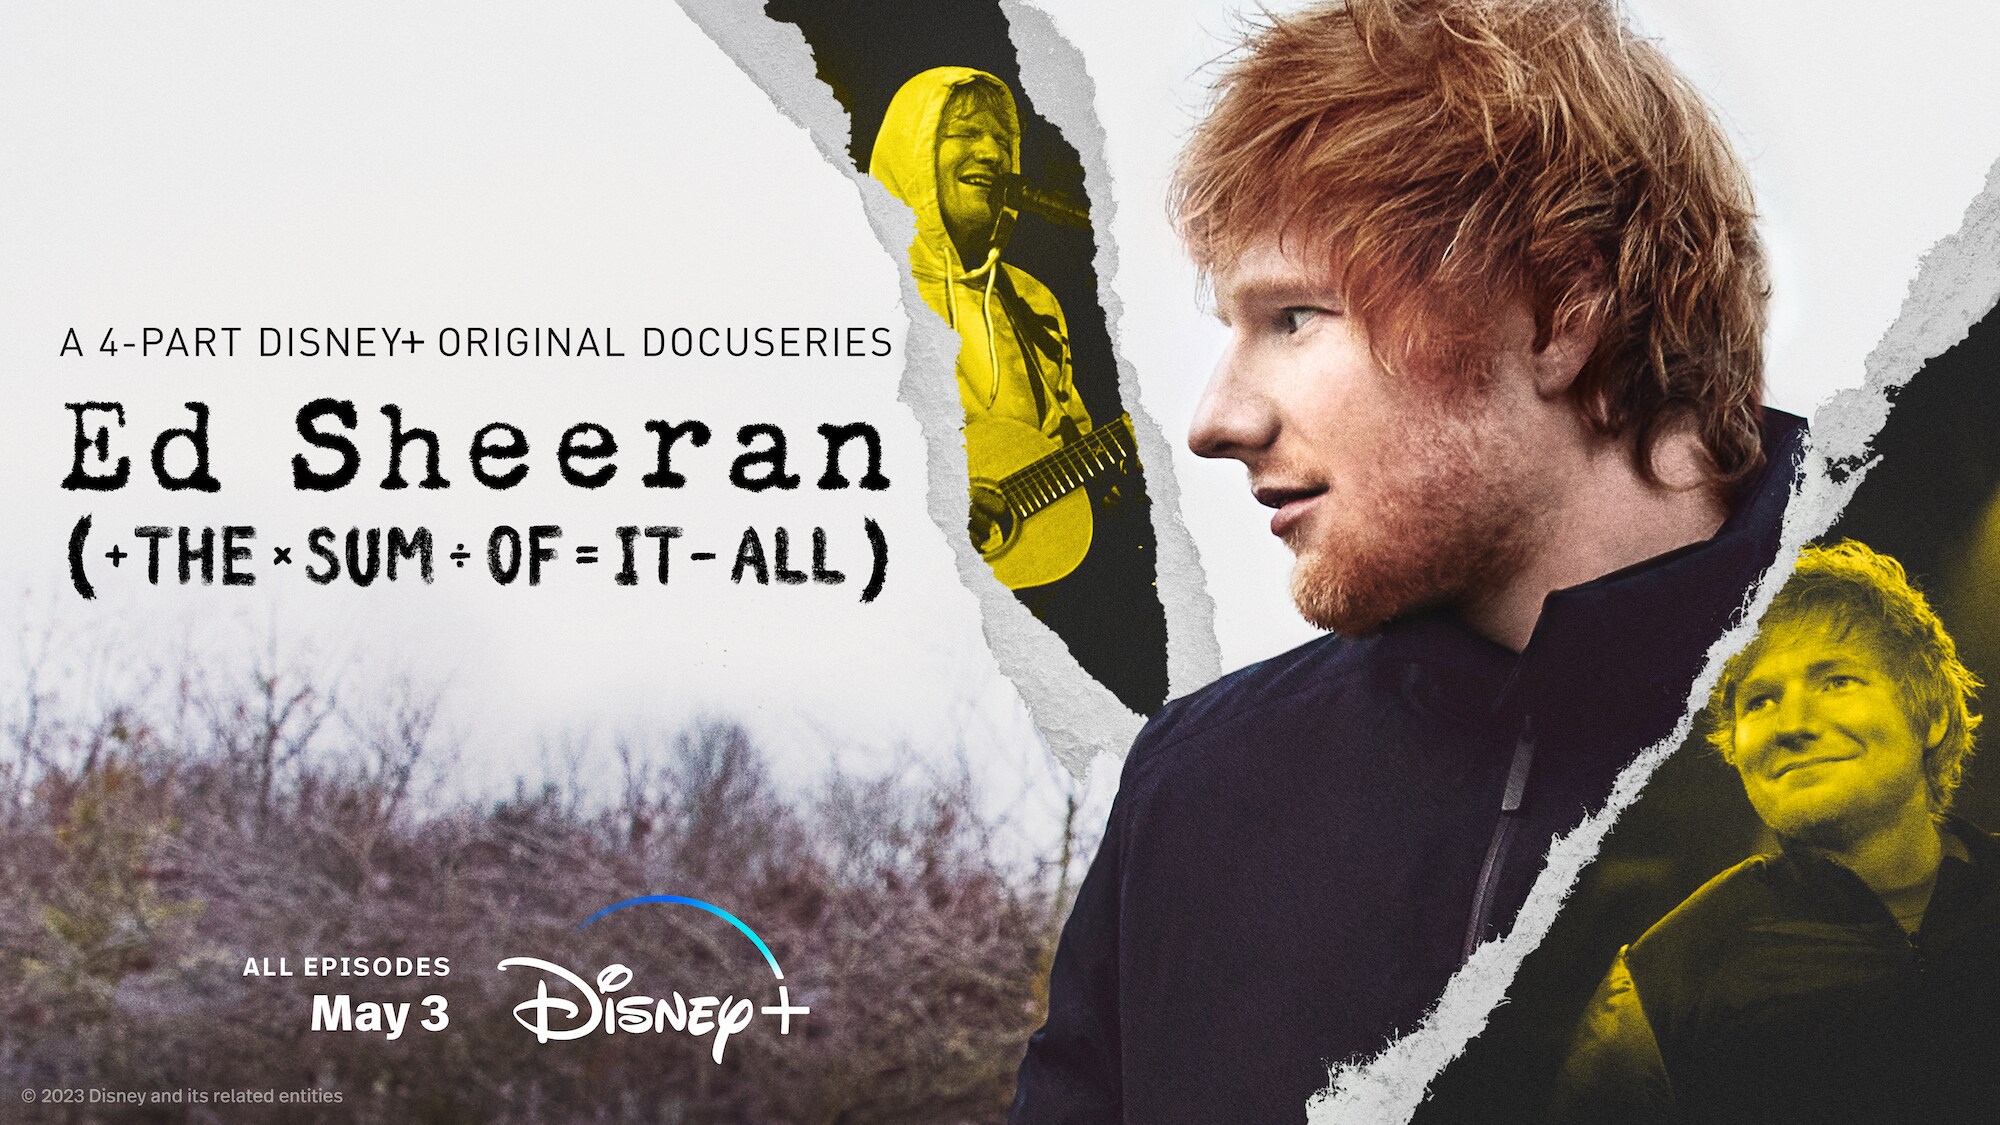 Global Superstar And Grammy® Award-Winning Artist Ed Sheeran Takes Viewers On An Intimate Journey Behind His Life And Multiplatinum Hits In Disney+ Original Series ‘Ed Sheeran: The Sum Of It All’